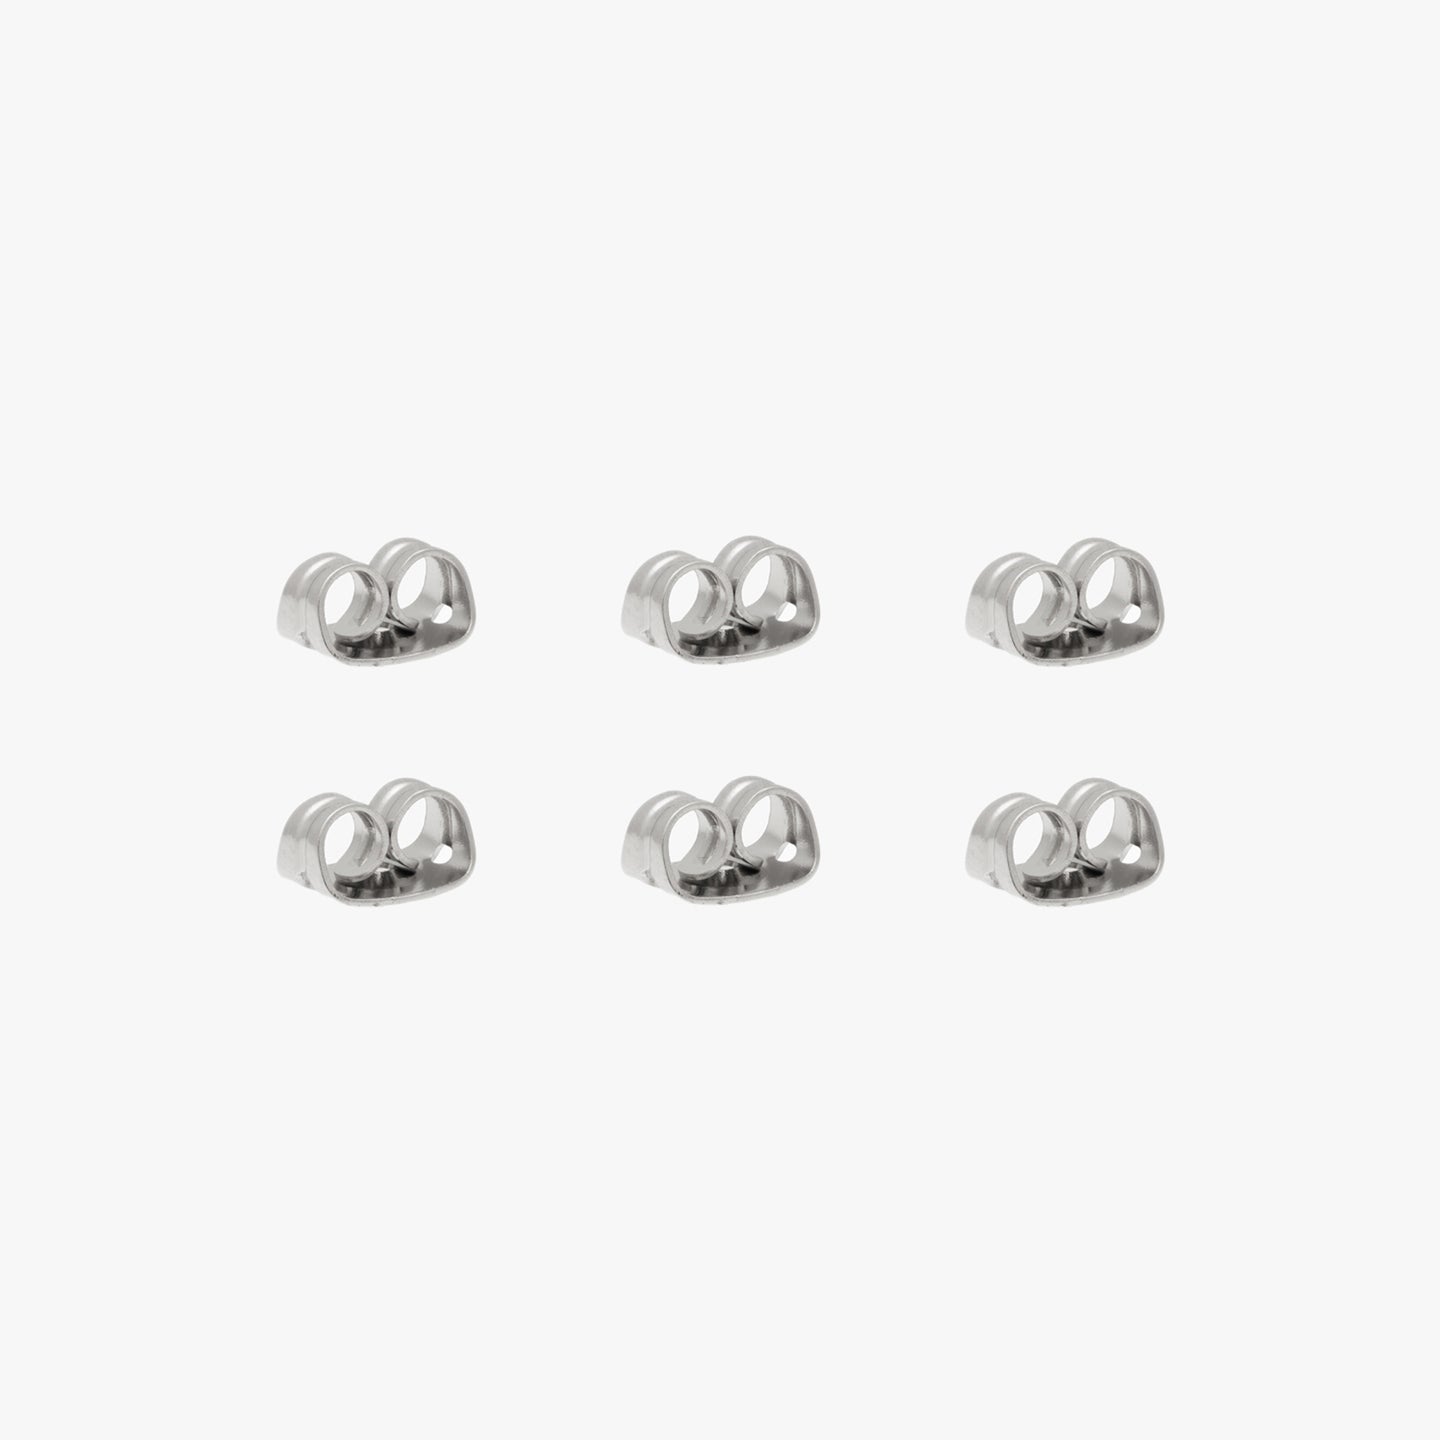 A silver pack of butterfly earring backs color:null|silver